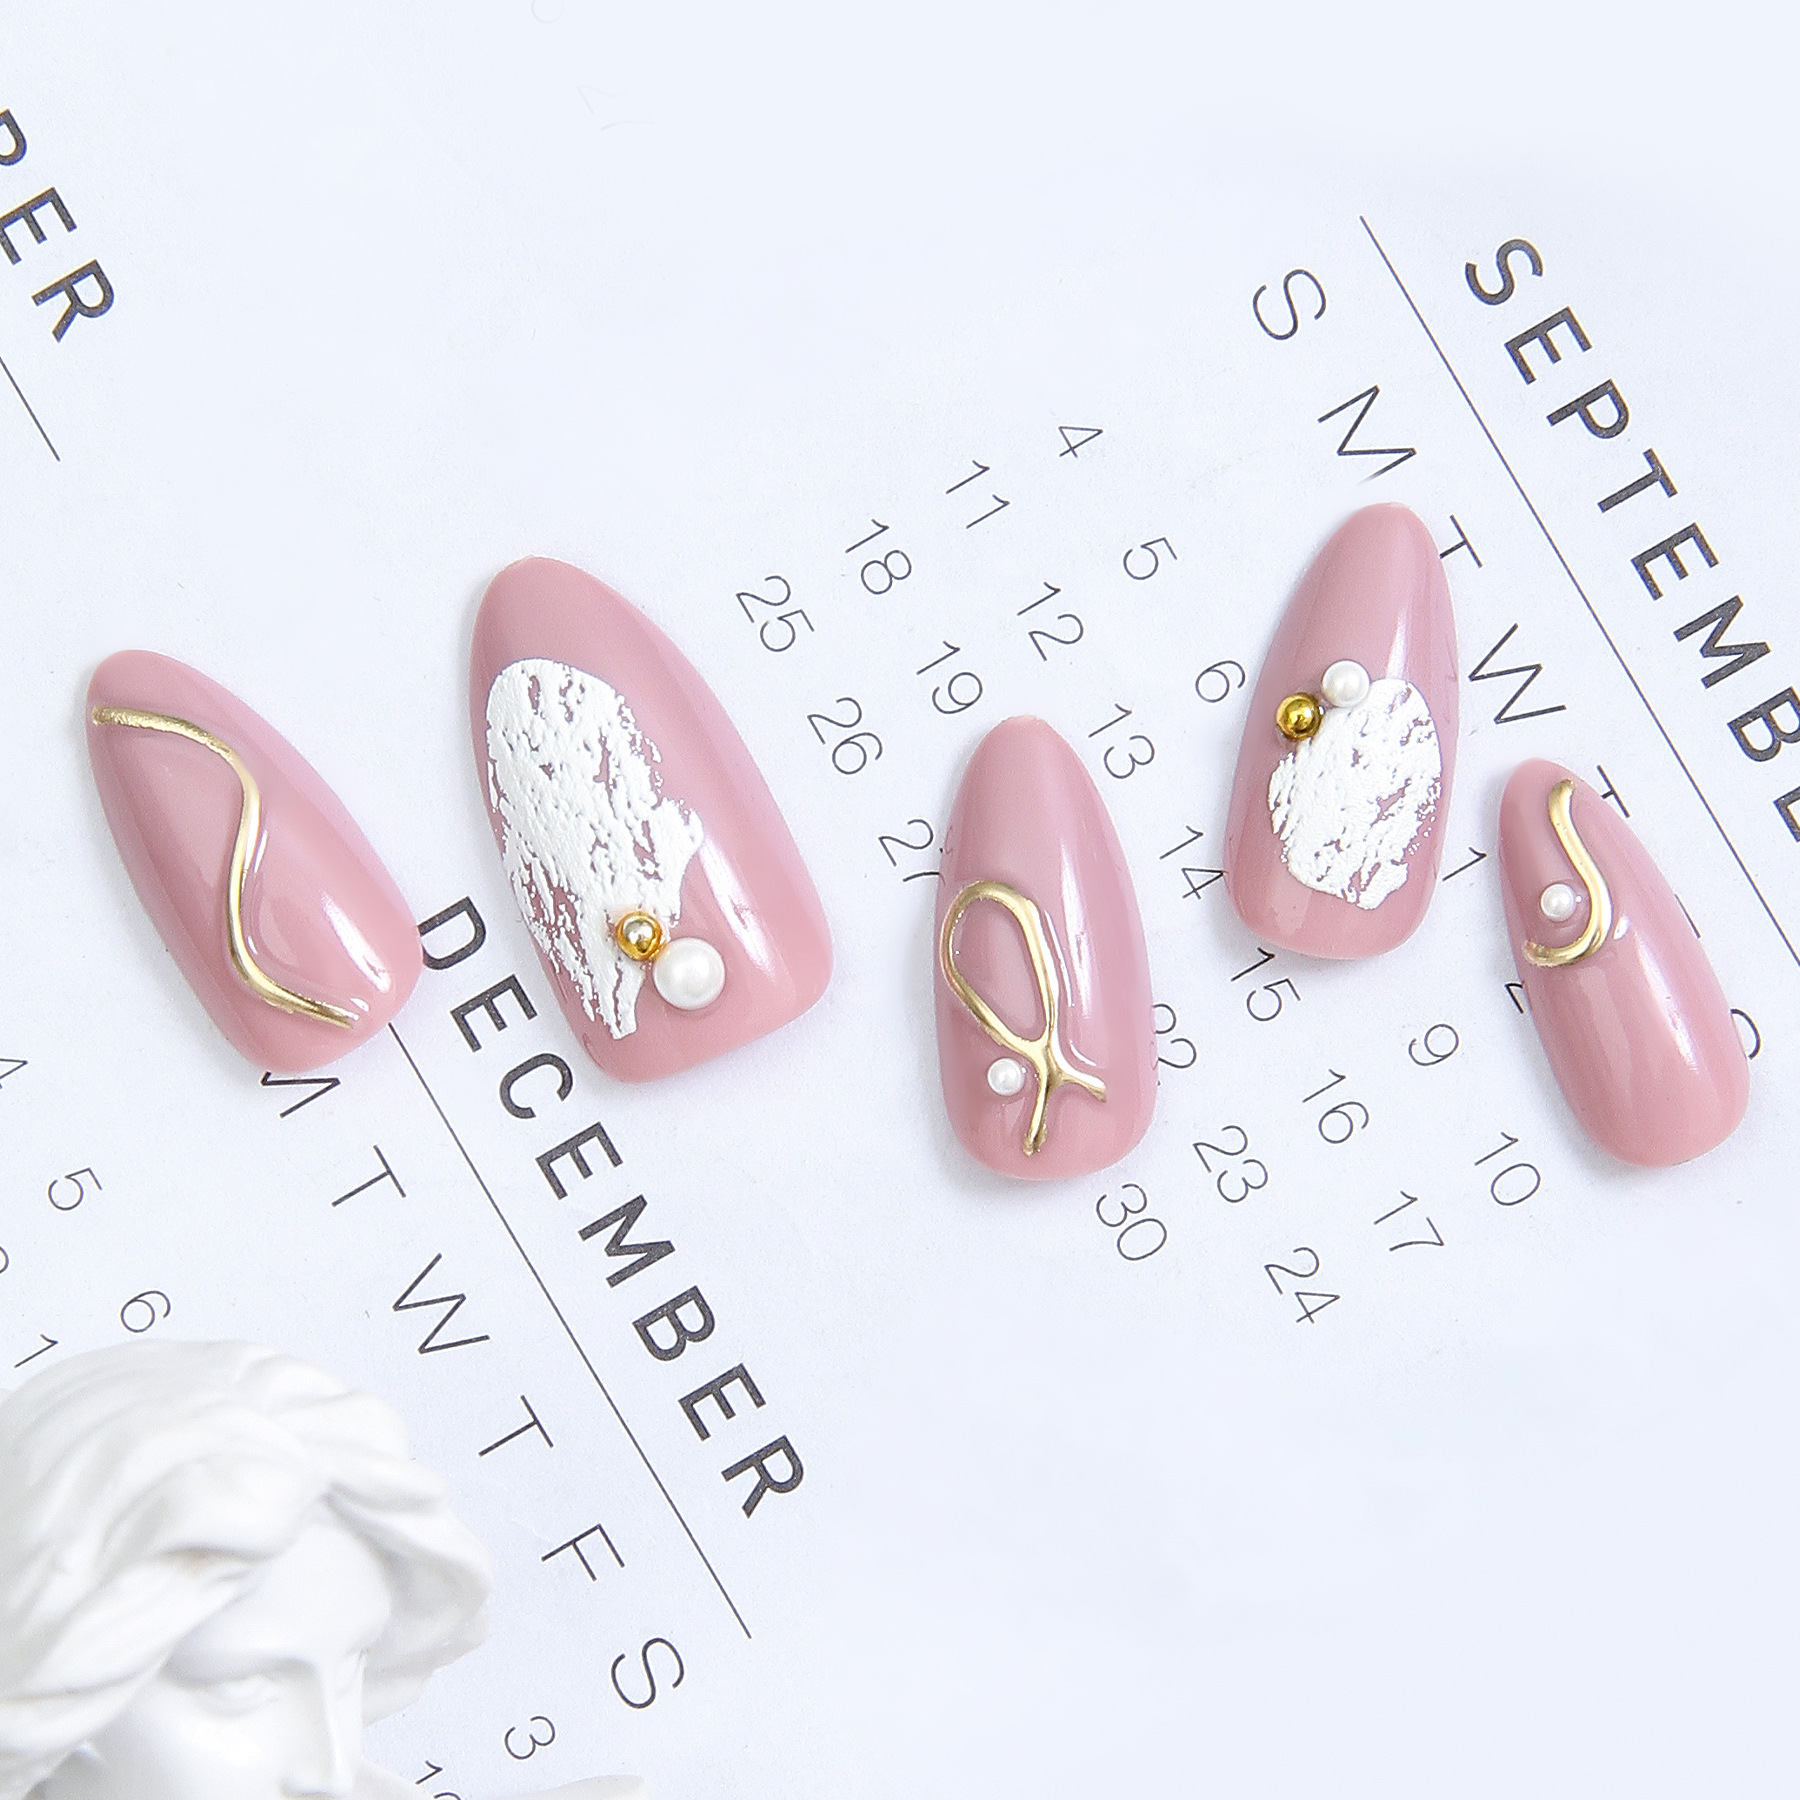 New 10 Pieces Three-Dimensional Japanese Handmade Wear Armor Relief 3d Almond Nail Finished Product Fake Nails Free Kit in Stock